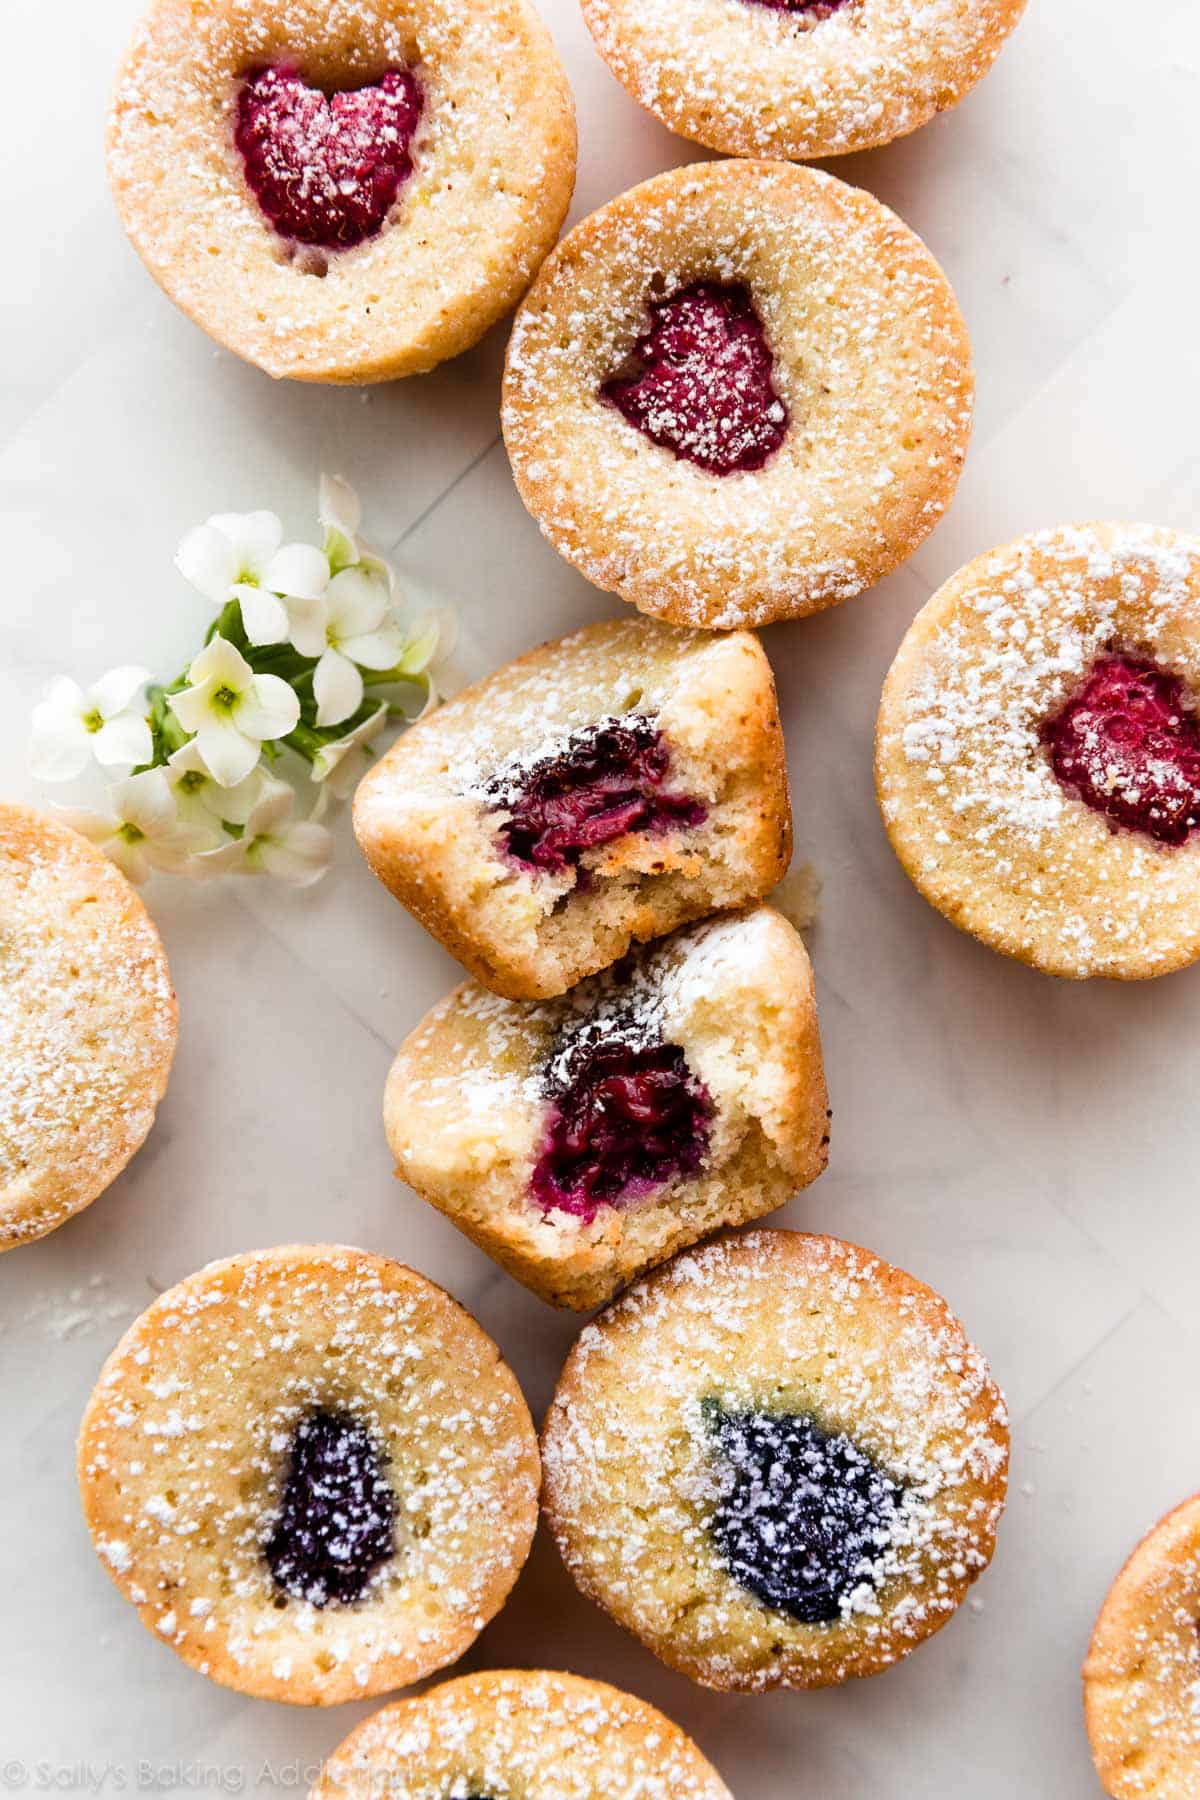 brown butter tea cakes with raspberries and blackberries in center